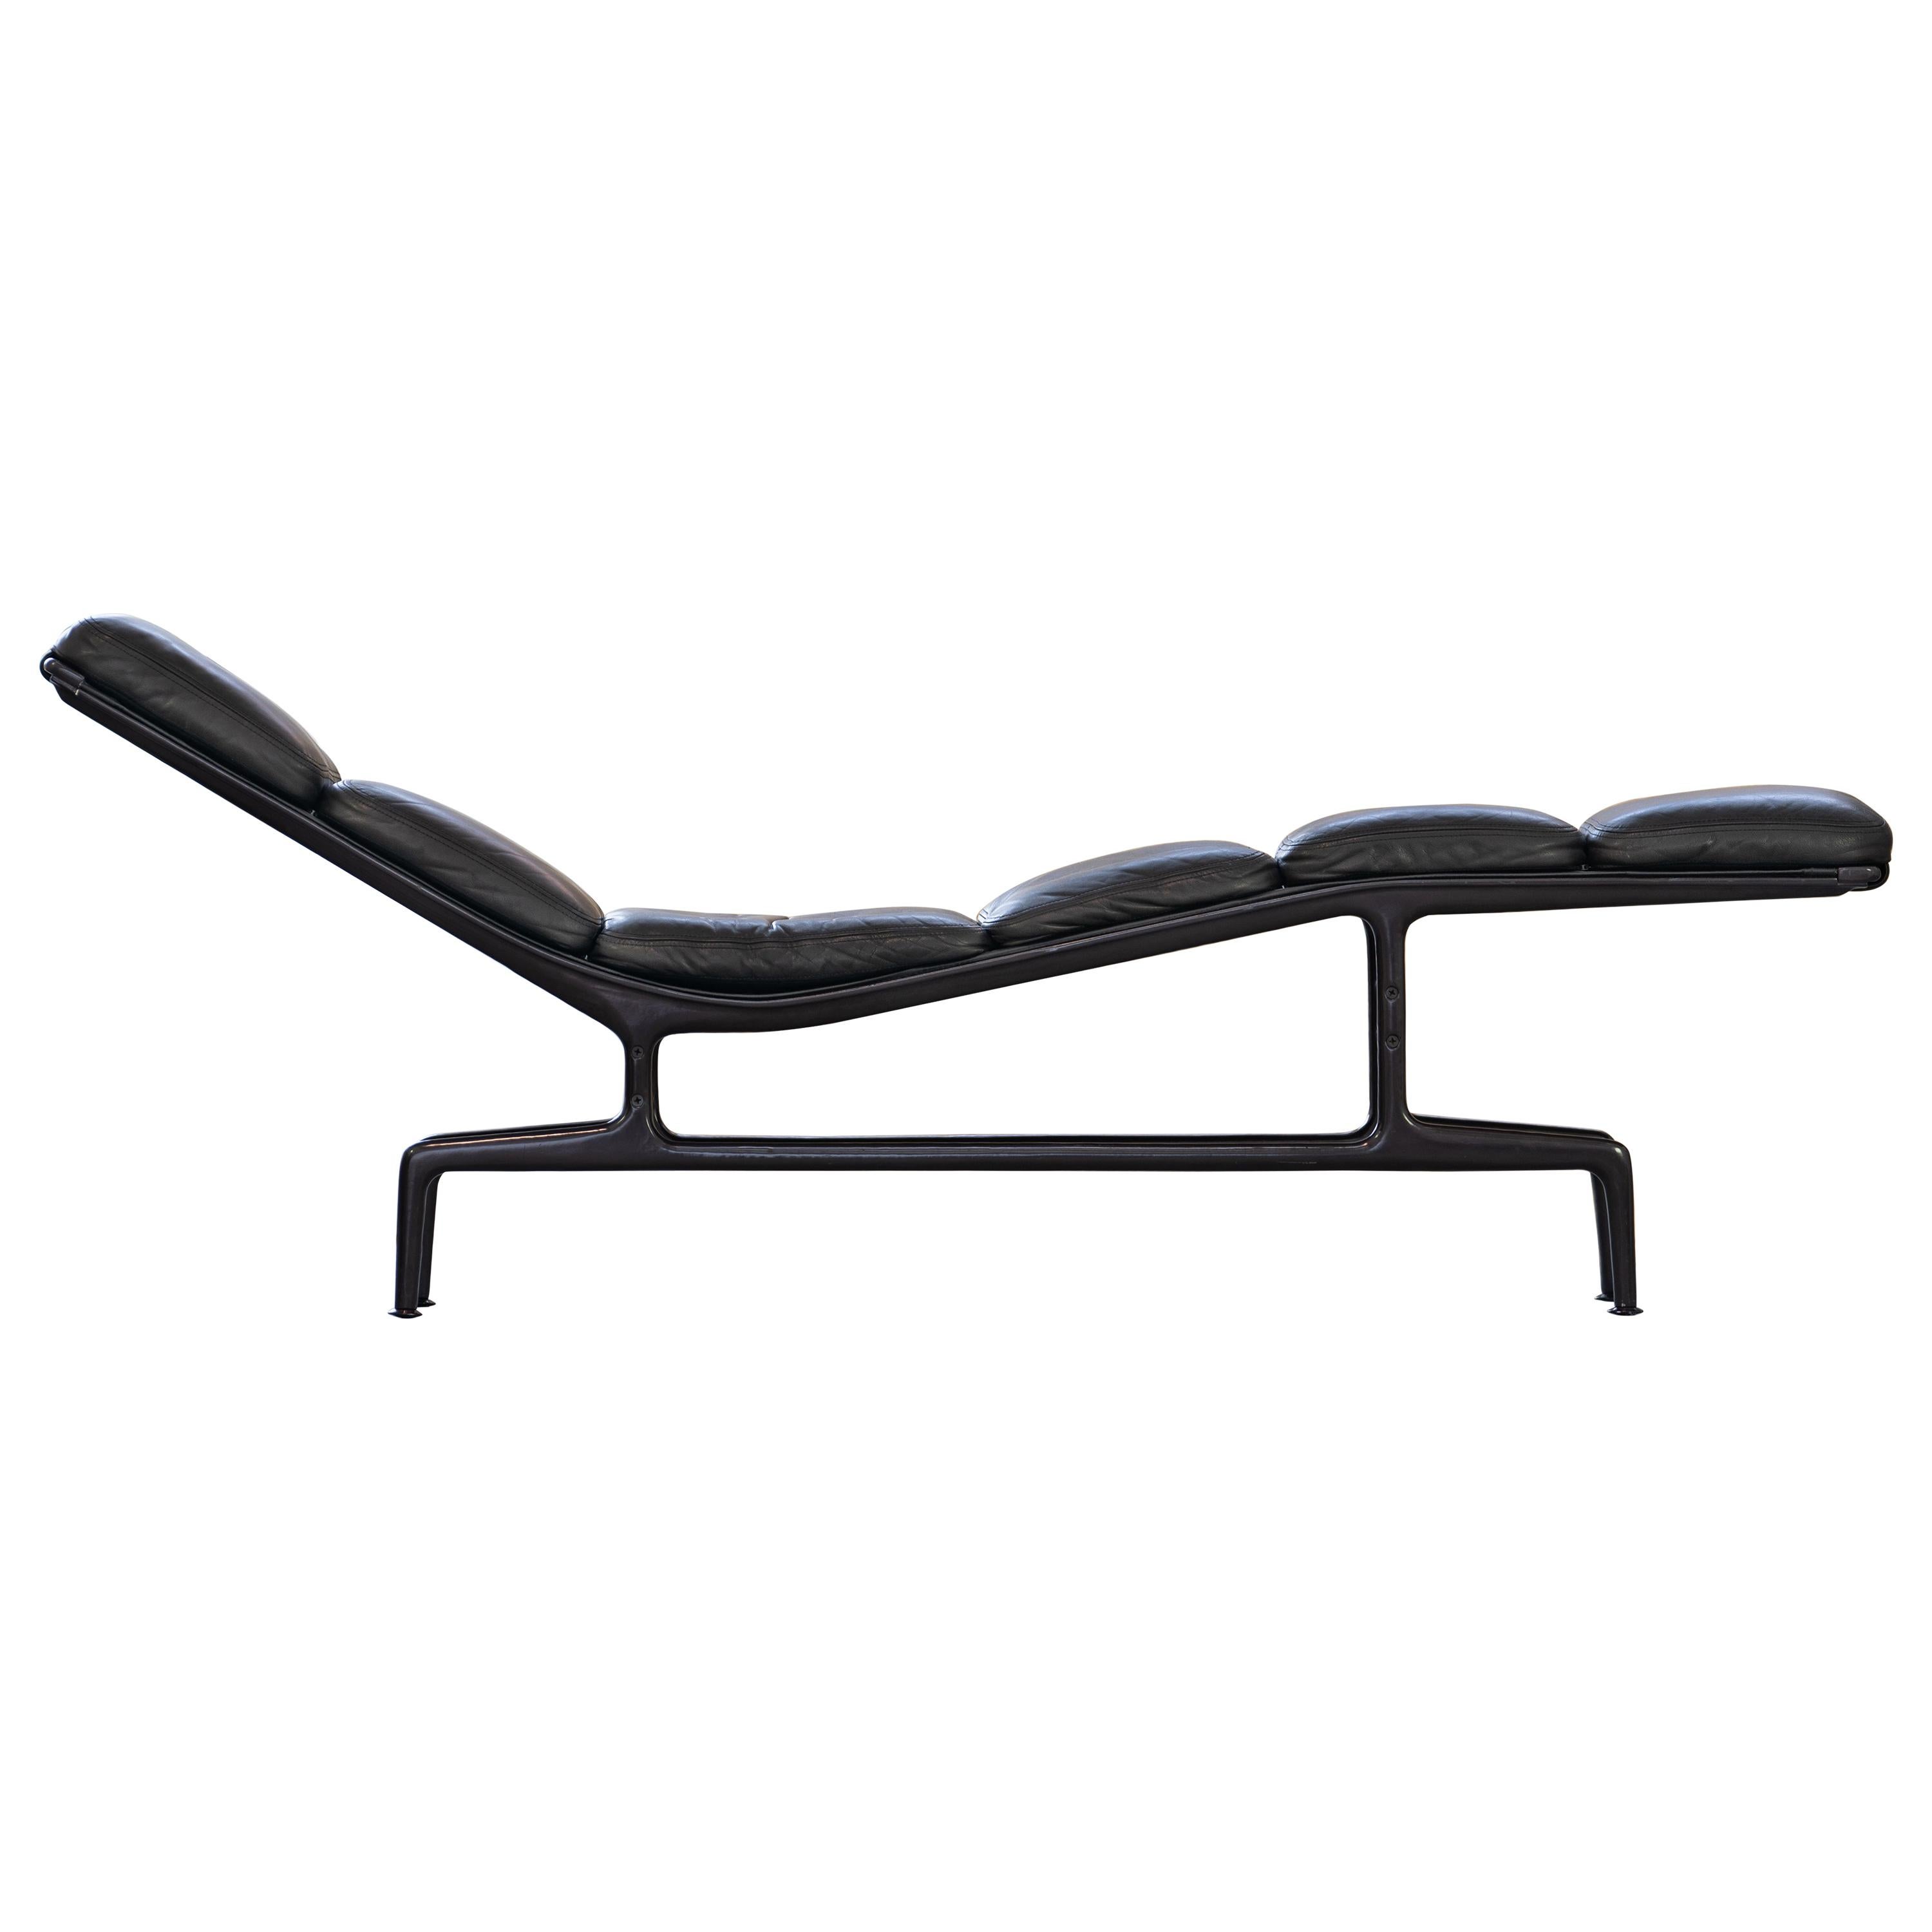 Charles & Ray Eames, 1968, Soft Pad Chaise ES 106 by Herman Miller Lounge Chair